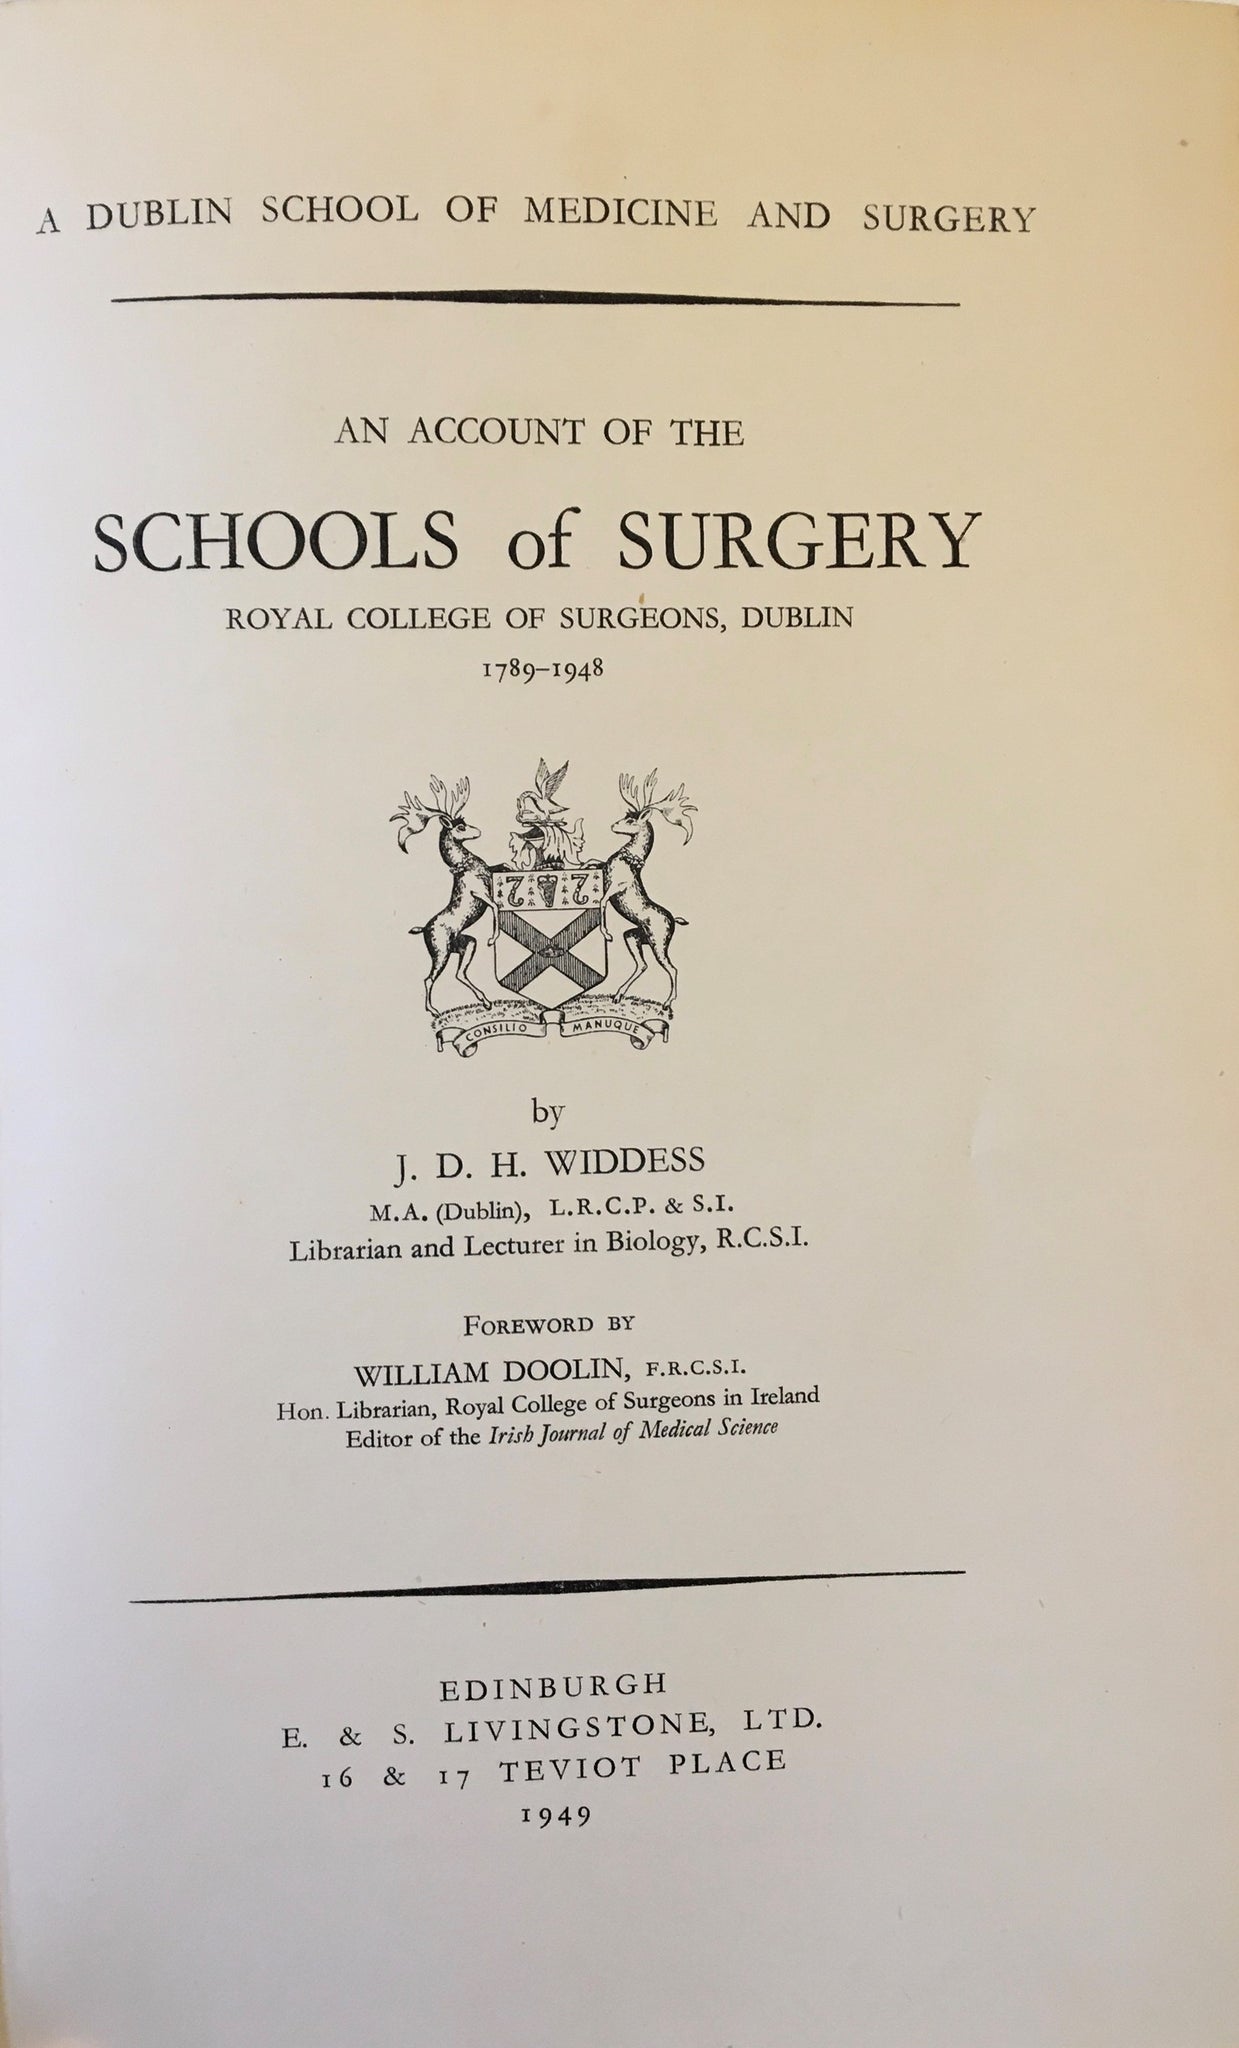 A Dublin School of Medicine and Surgery: an account of the schools of surgery, Royal College of Surgeons, Dublin, 1789-1948, by J. D. H. Widdess